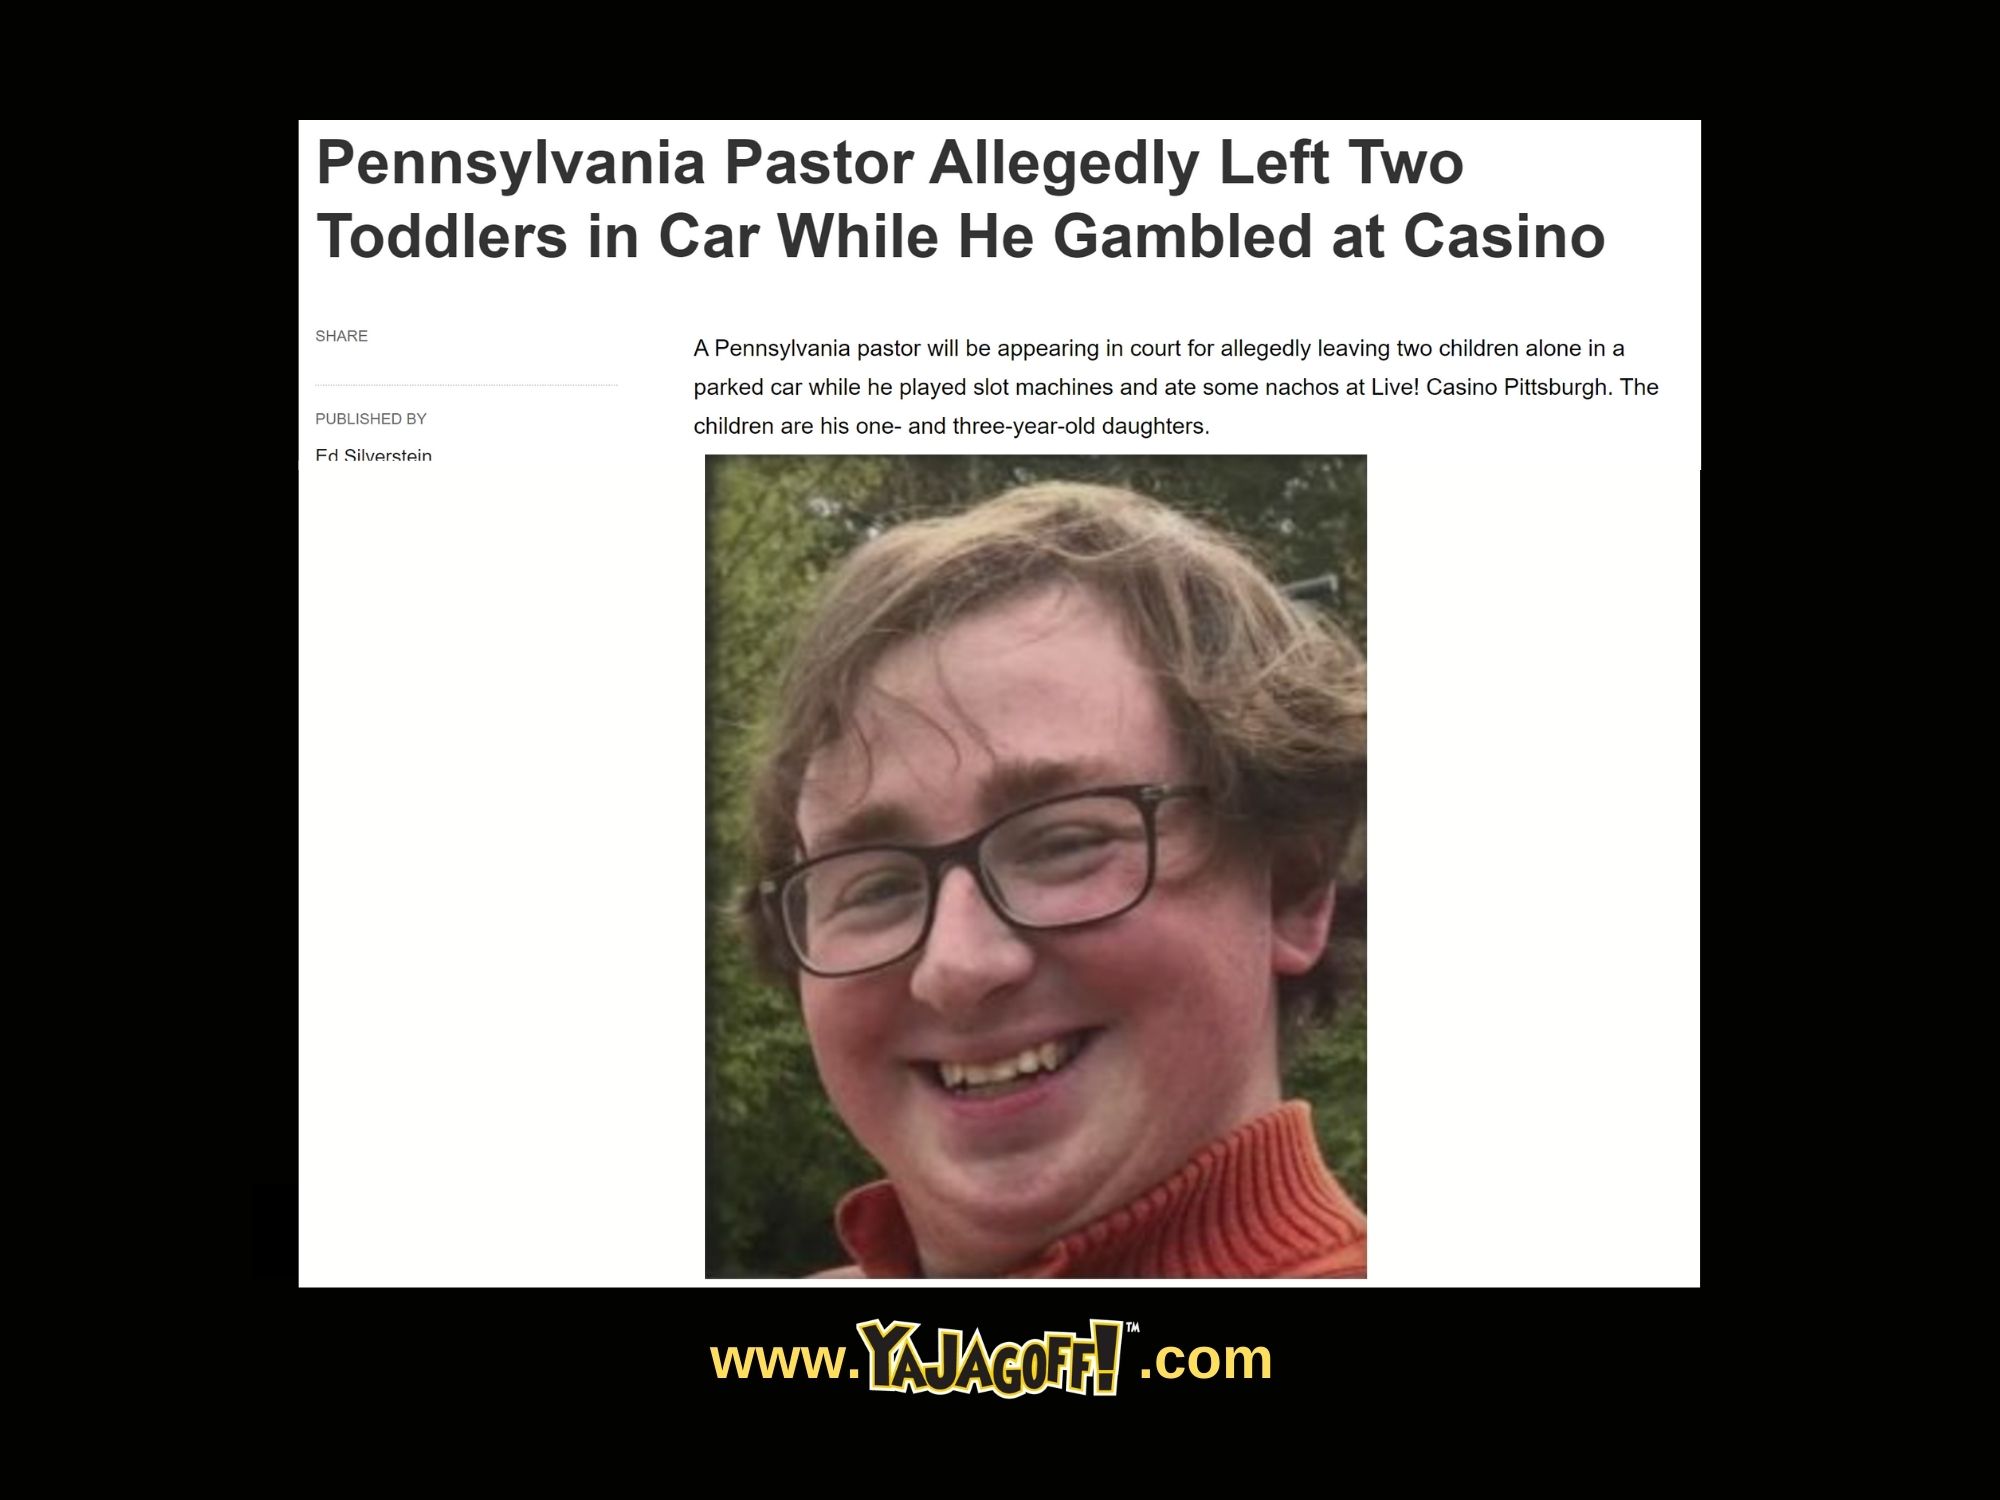 Pastor Allegedly Left Two Toddlers in Car While He Gambled at Casino